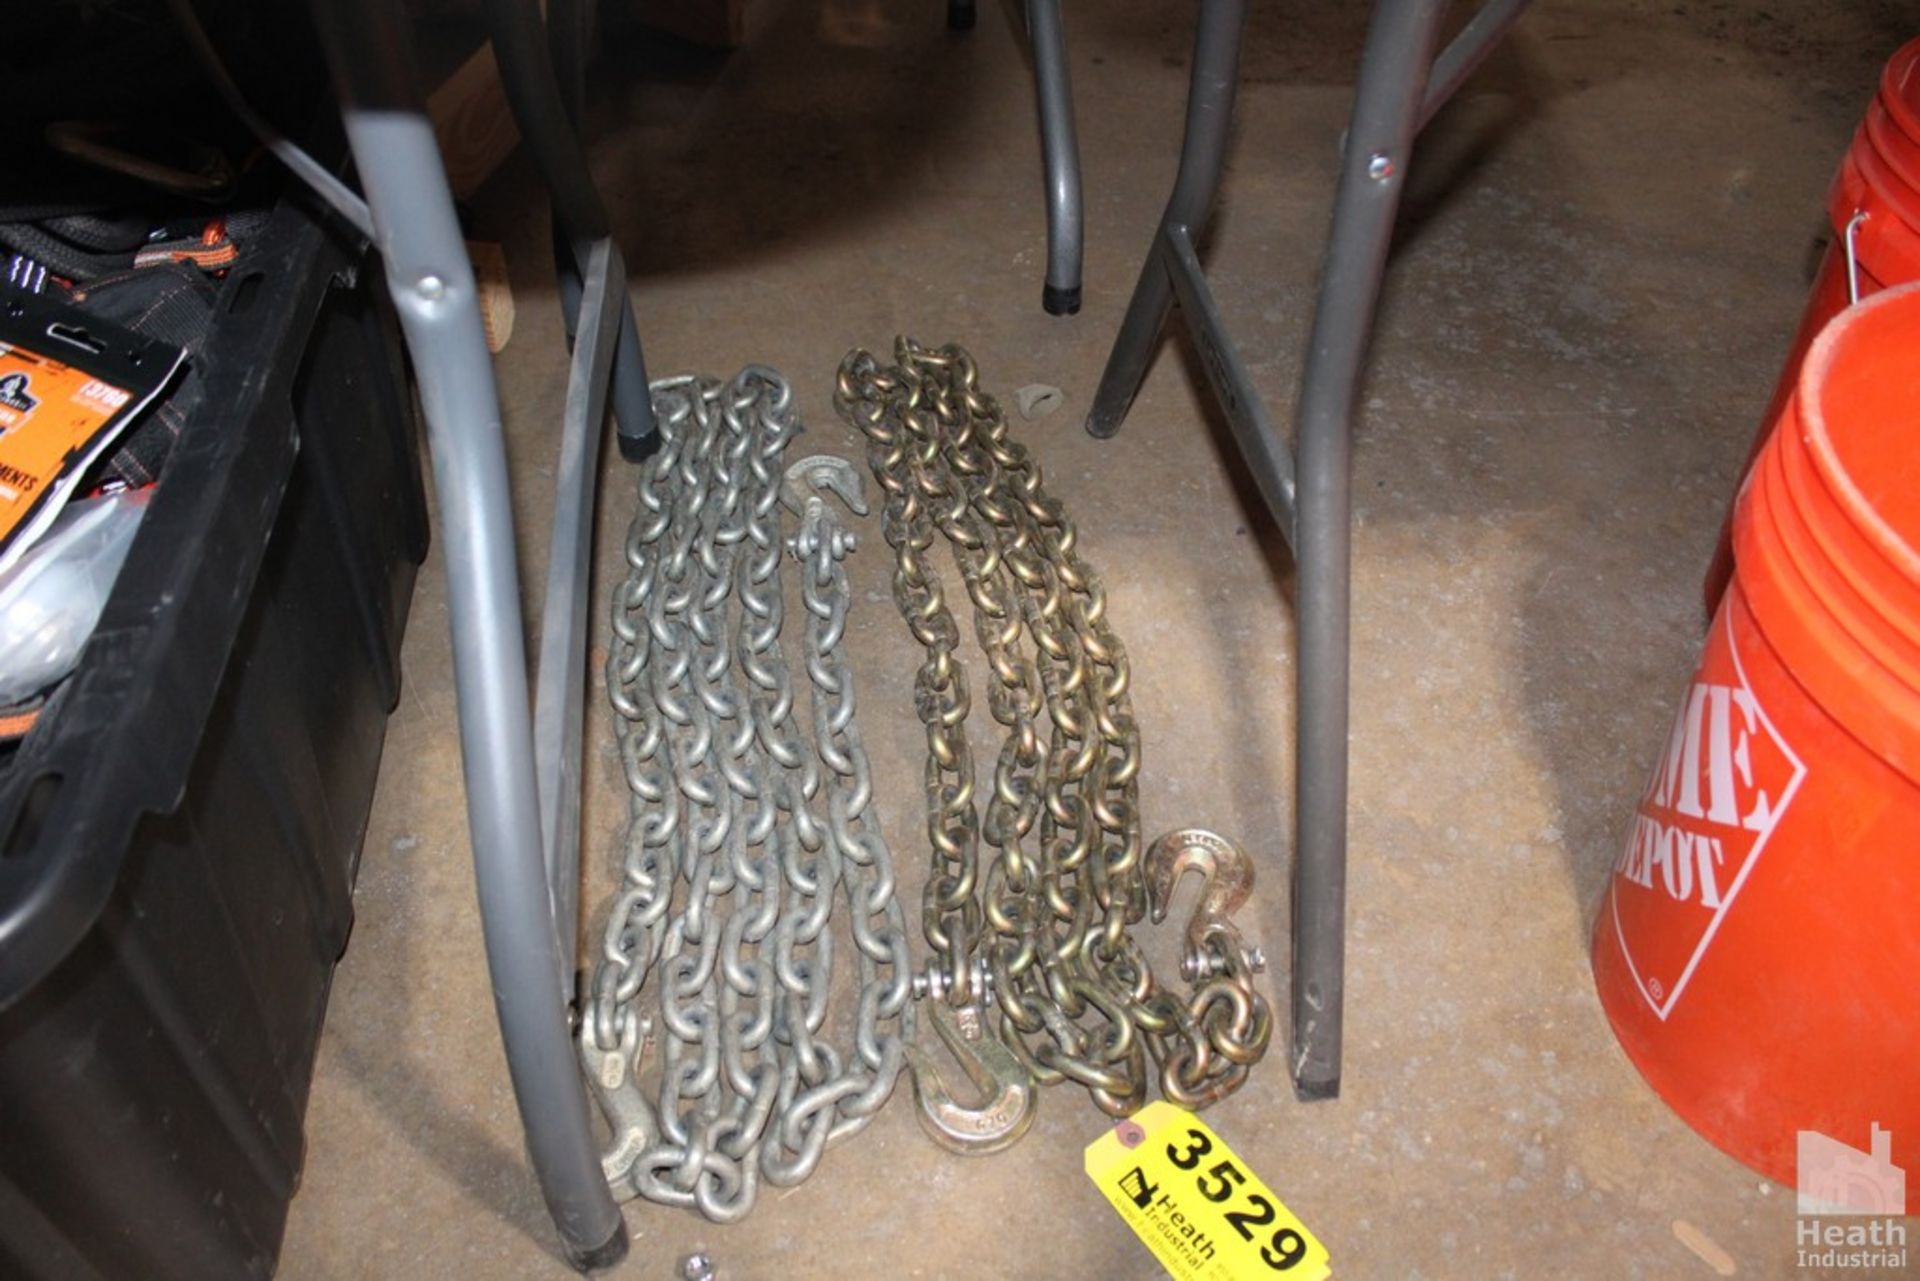 (2) CHAINS WITH HOOKS AT BOTH ENDS, APPROX 9' LONG